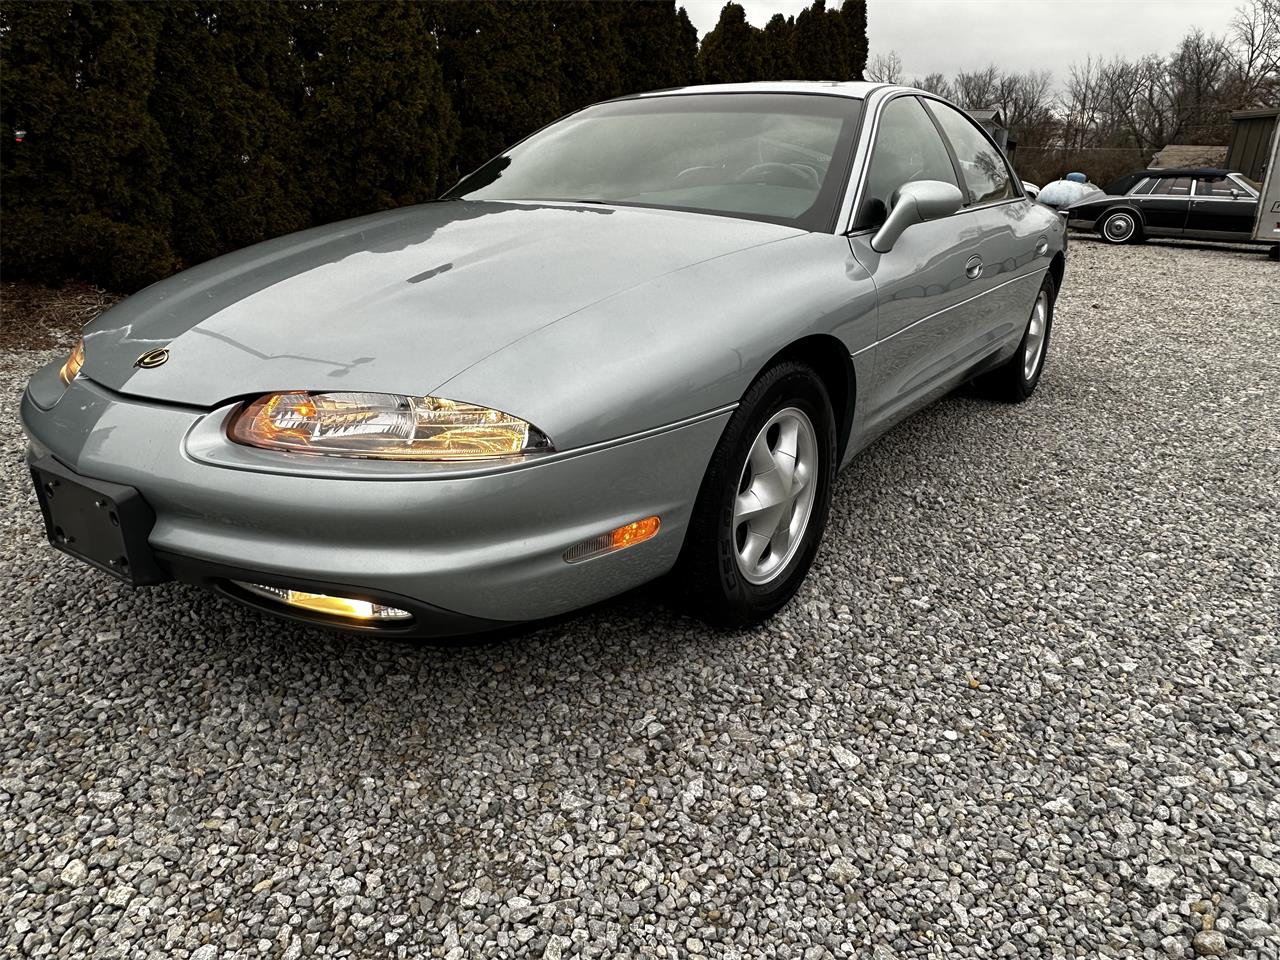 For Sale: 1997 Oldsmobile Aurora in Milford , Ohio for sale in Milford, OH